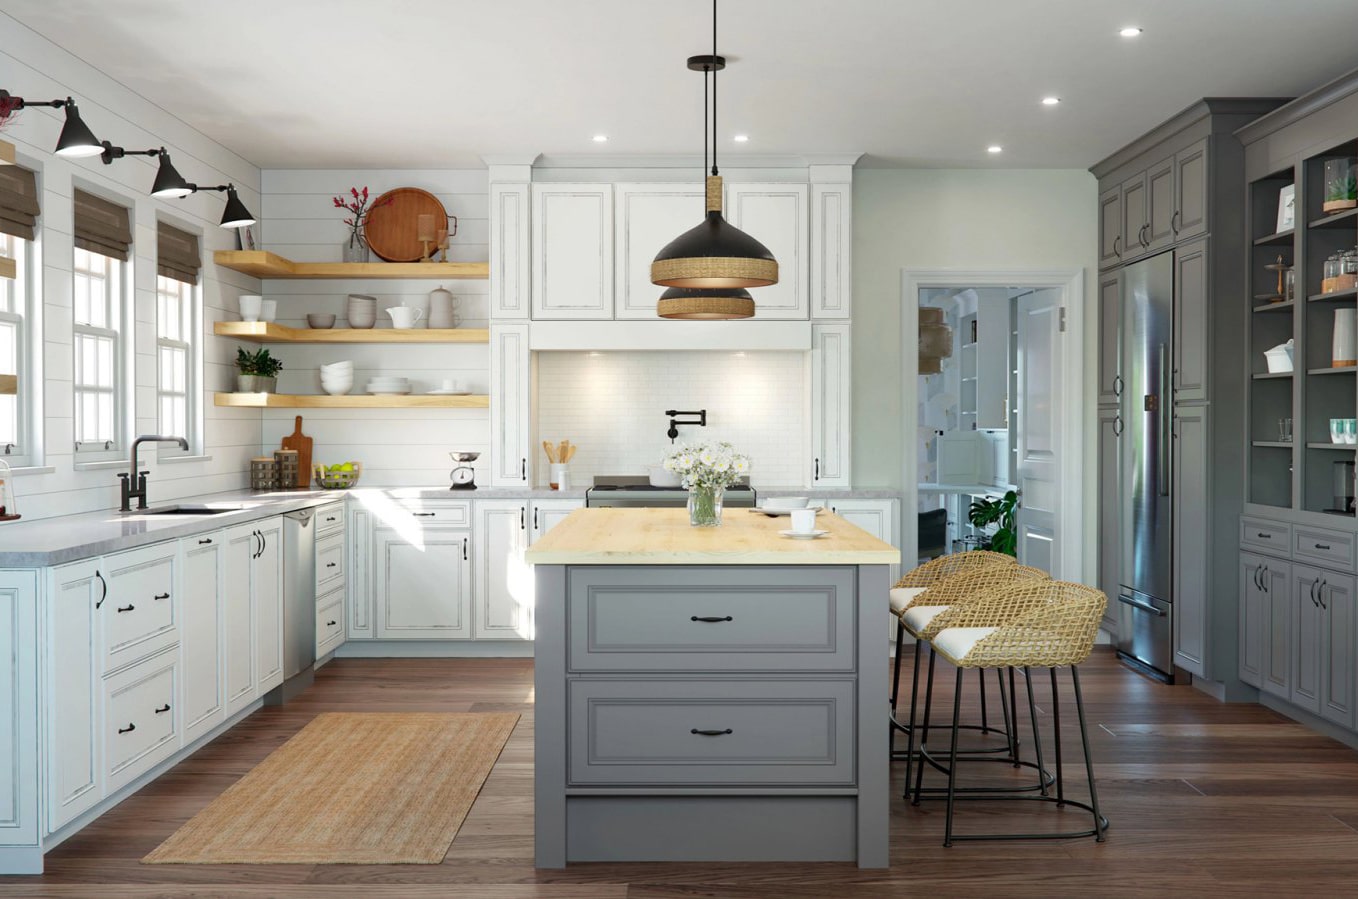 Waypoint Kitchen Cabinet featuring white and grey colored cabinets and cream countertop